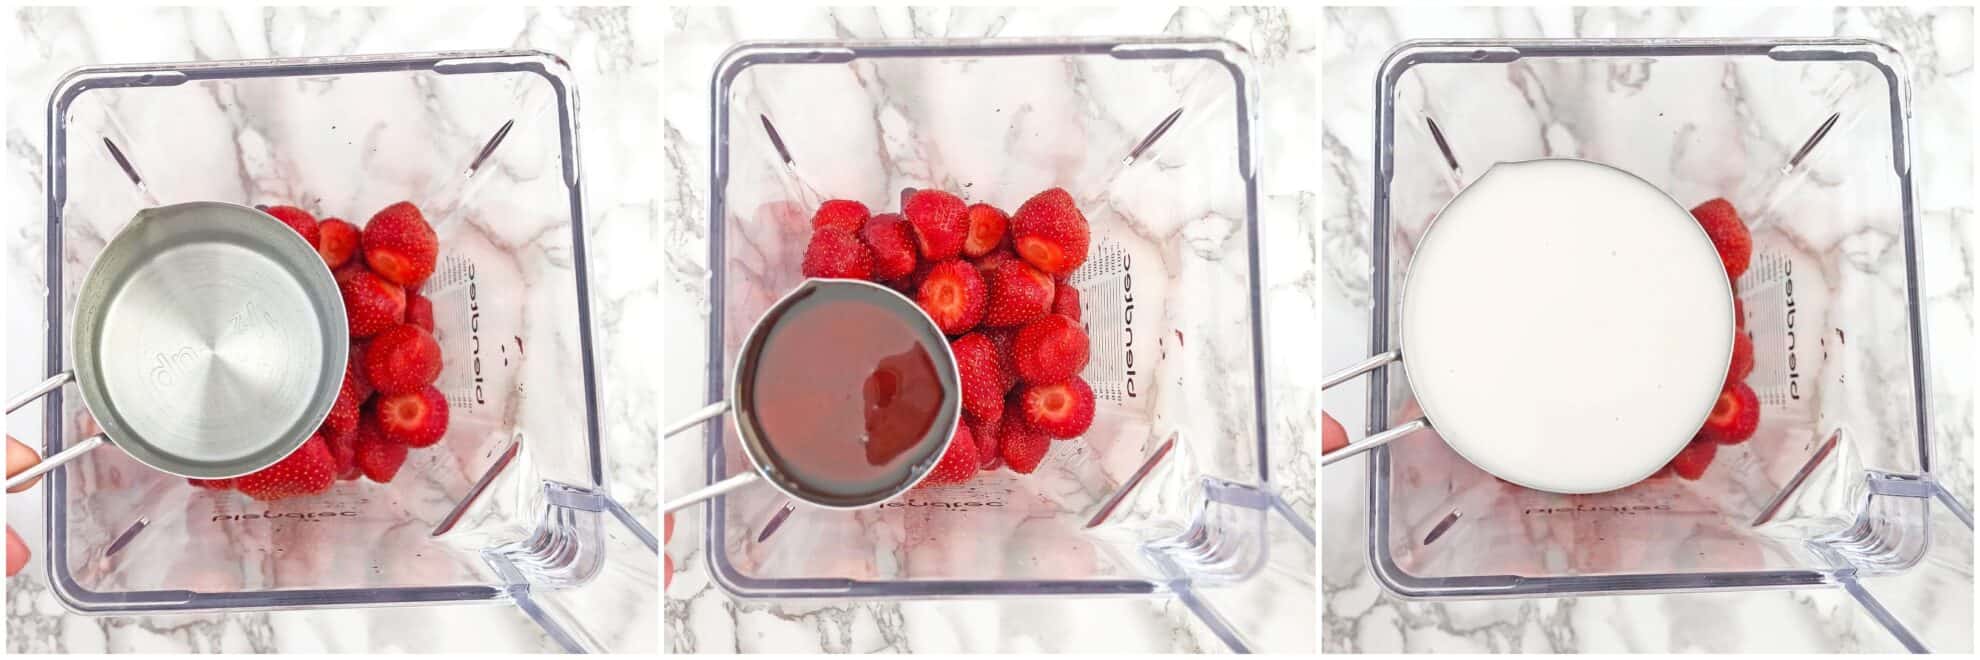 clean eating, dairy free, easy recipe, fresh strawberries, garden strawberries, gluten-free, healthy, Healthy Strawberry Popsicles Recipe, homegrown strawberries, homemade popsicles, kid-friendly, maple from Canada, organic maple syrup, popsicles, vanilla cashew milk, refined-sugar-free, vegan